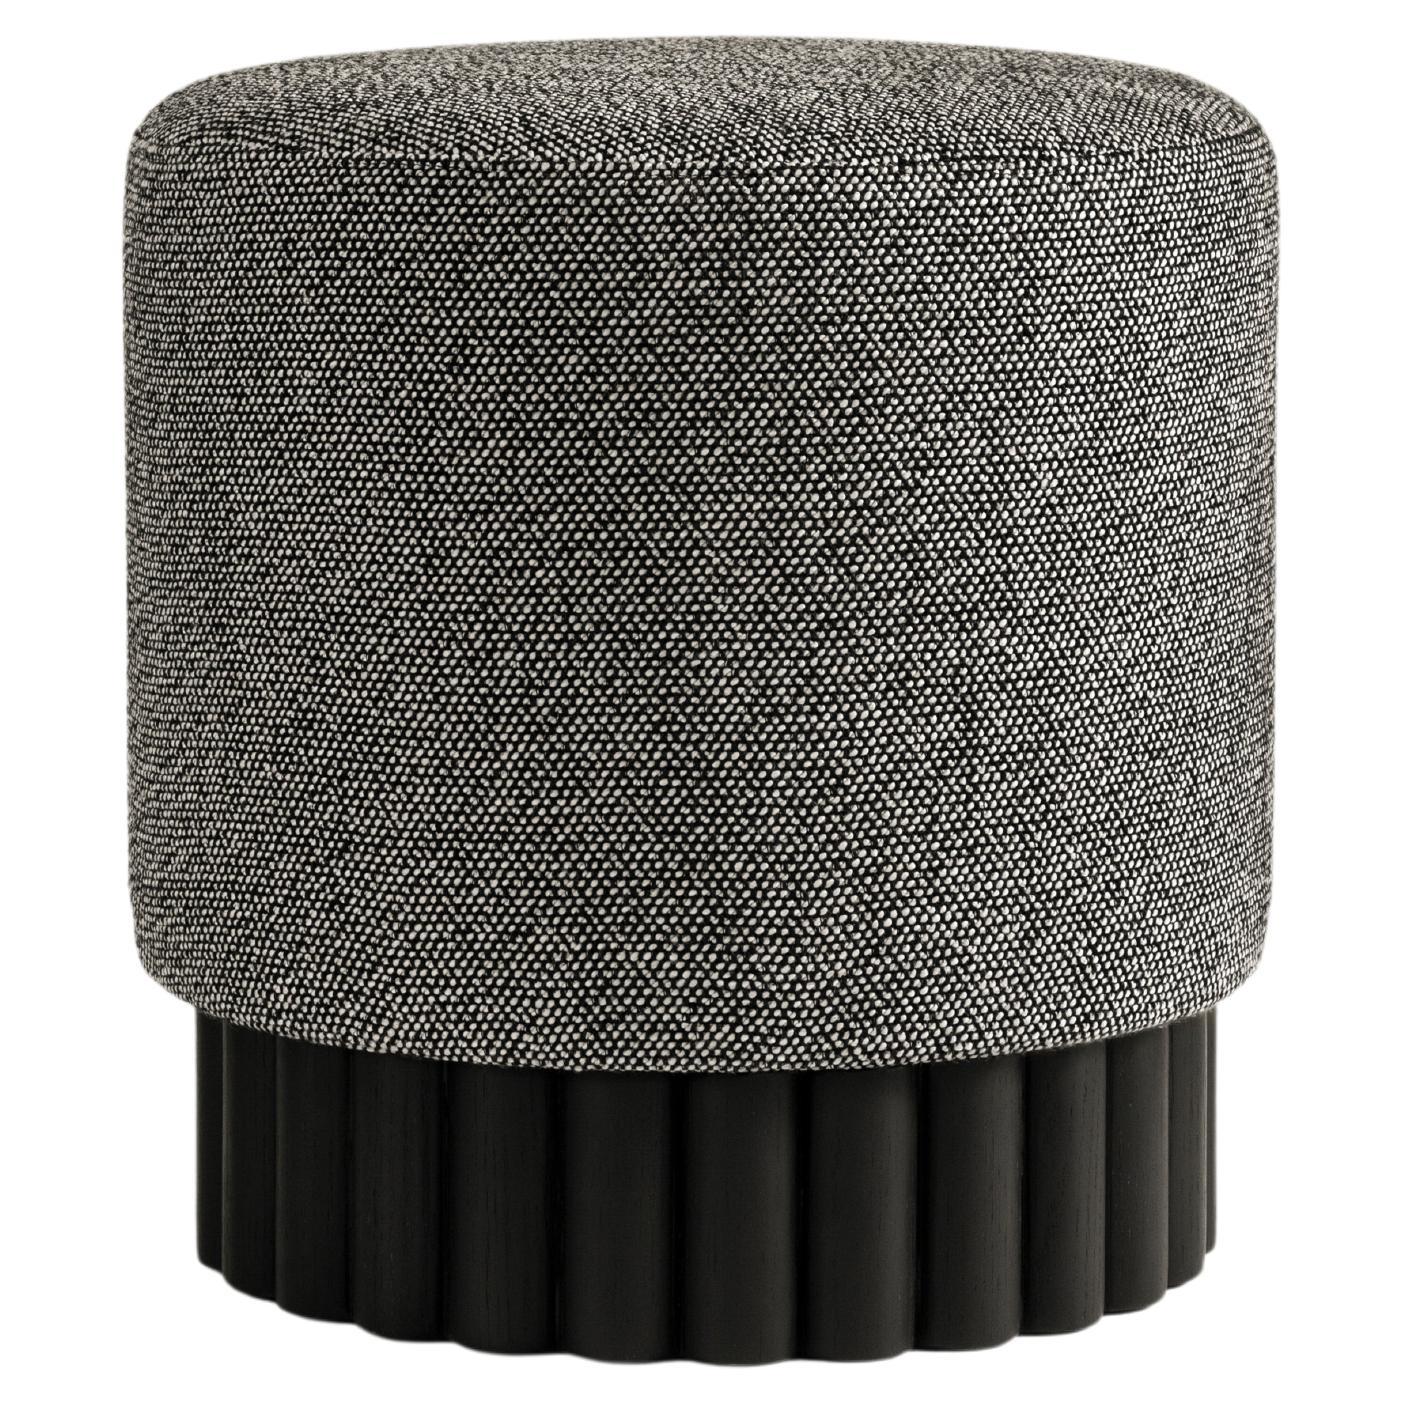 Loto Pouf, Black and White Boucle by Peca For Sale